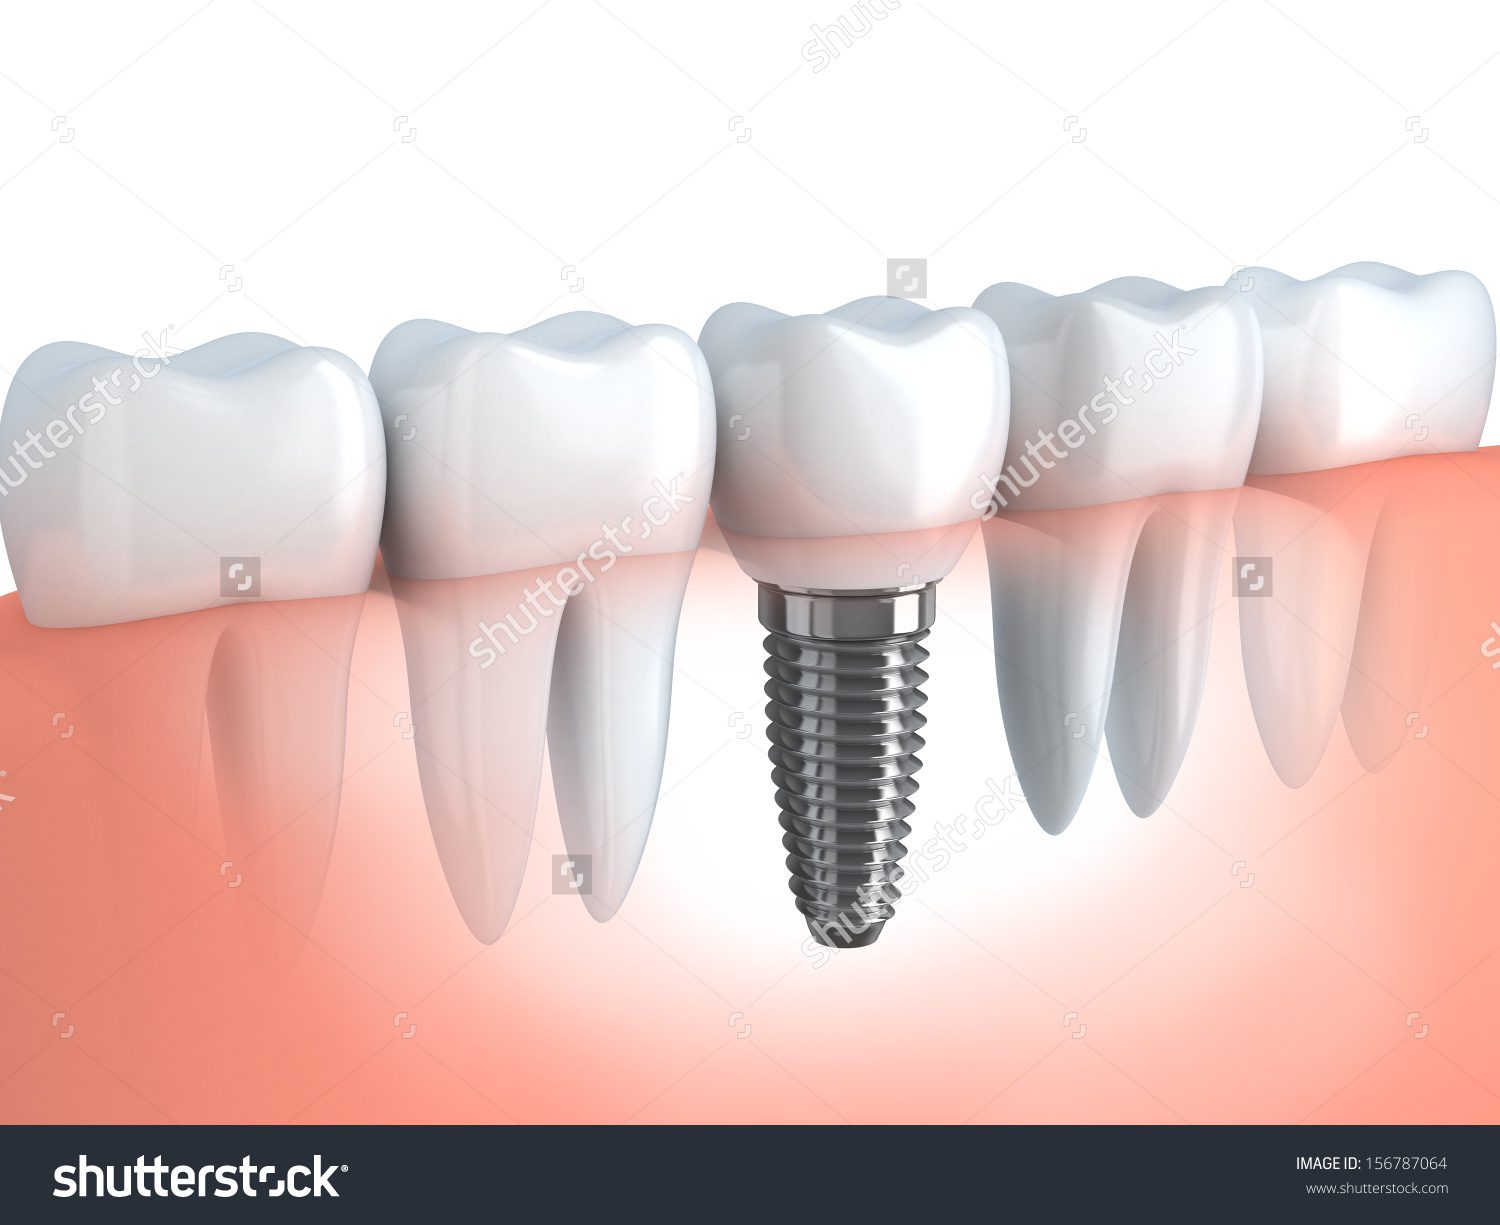 Teeth canine Types of